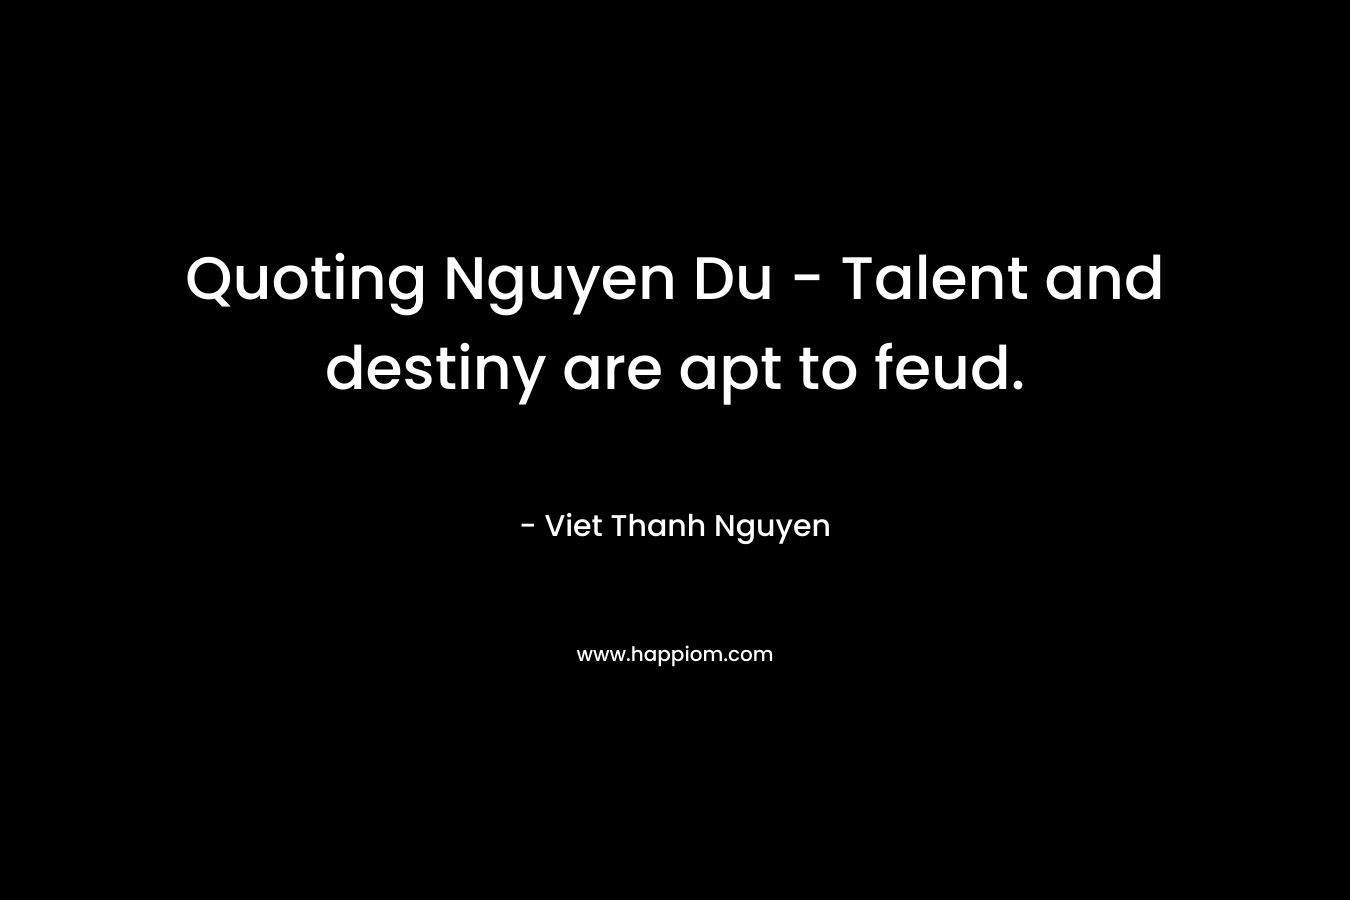 Quoting Nguyen Du – Talent and destiny are apt to feud. – Viet Thanh Nguyen